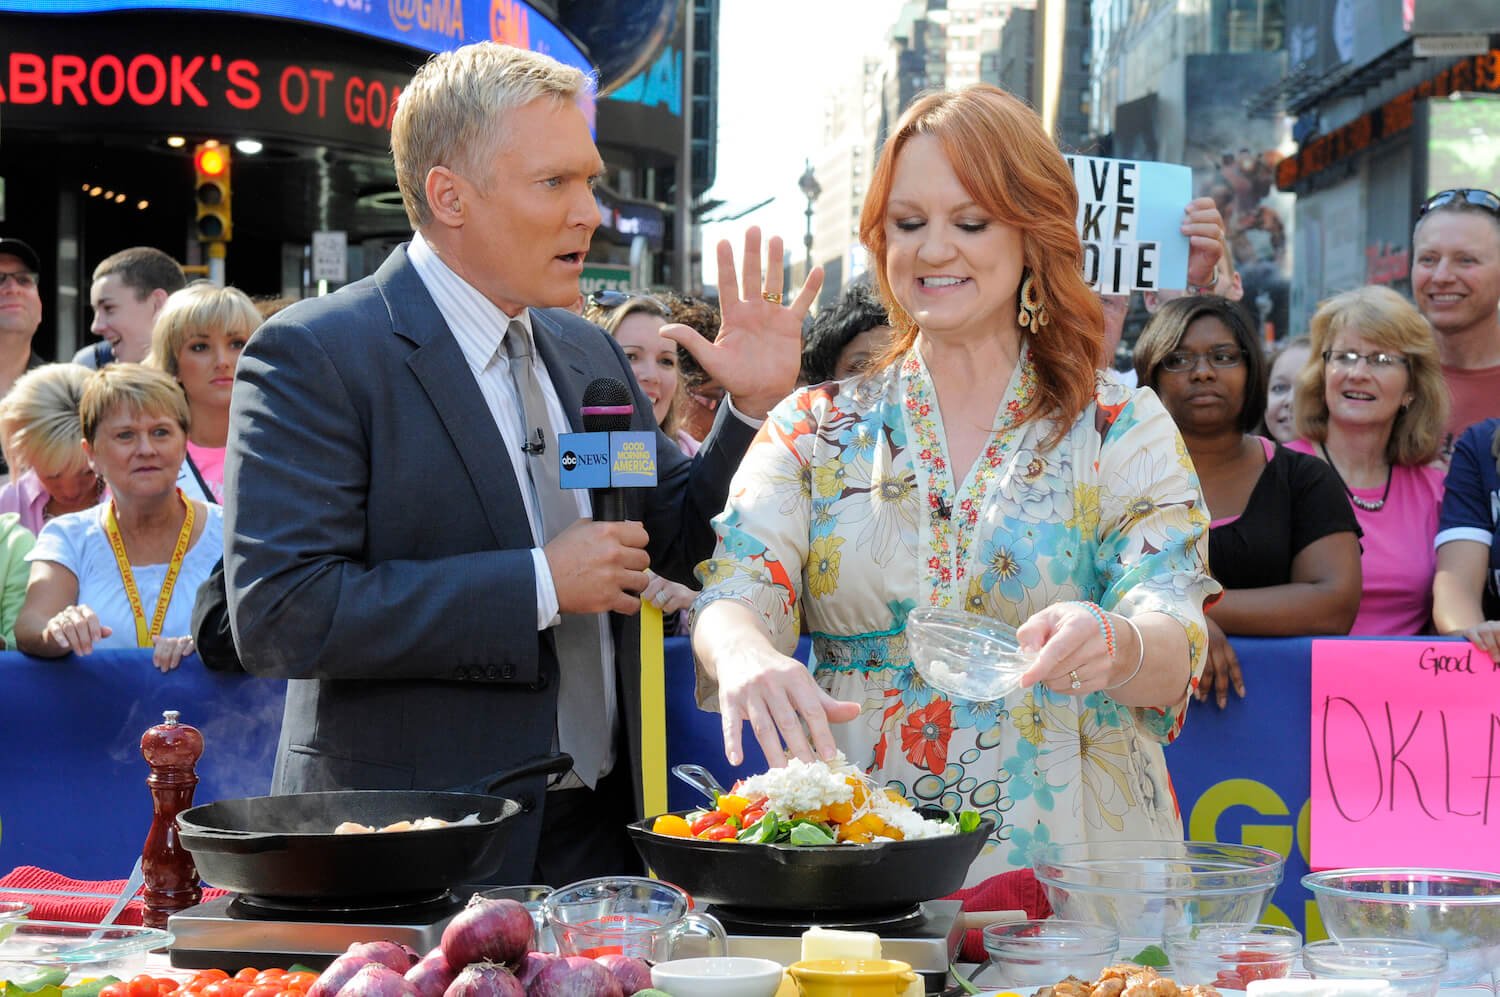 Ree Drummond from 'The Pioneer Woman' making food while being interviewed 